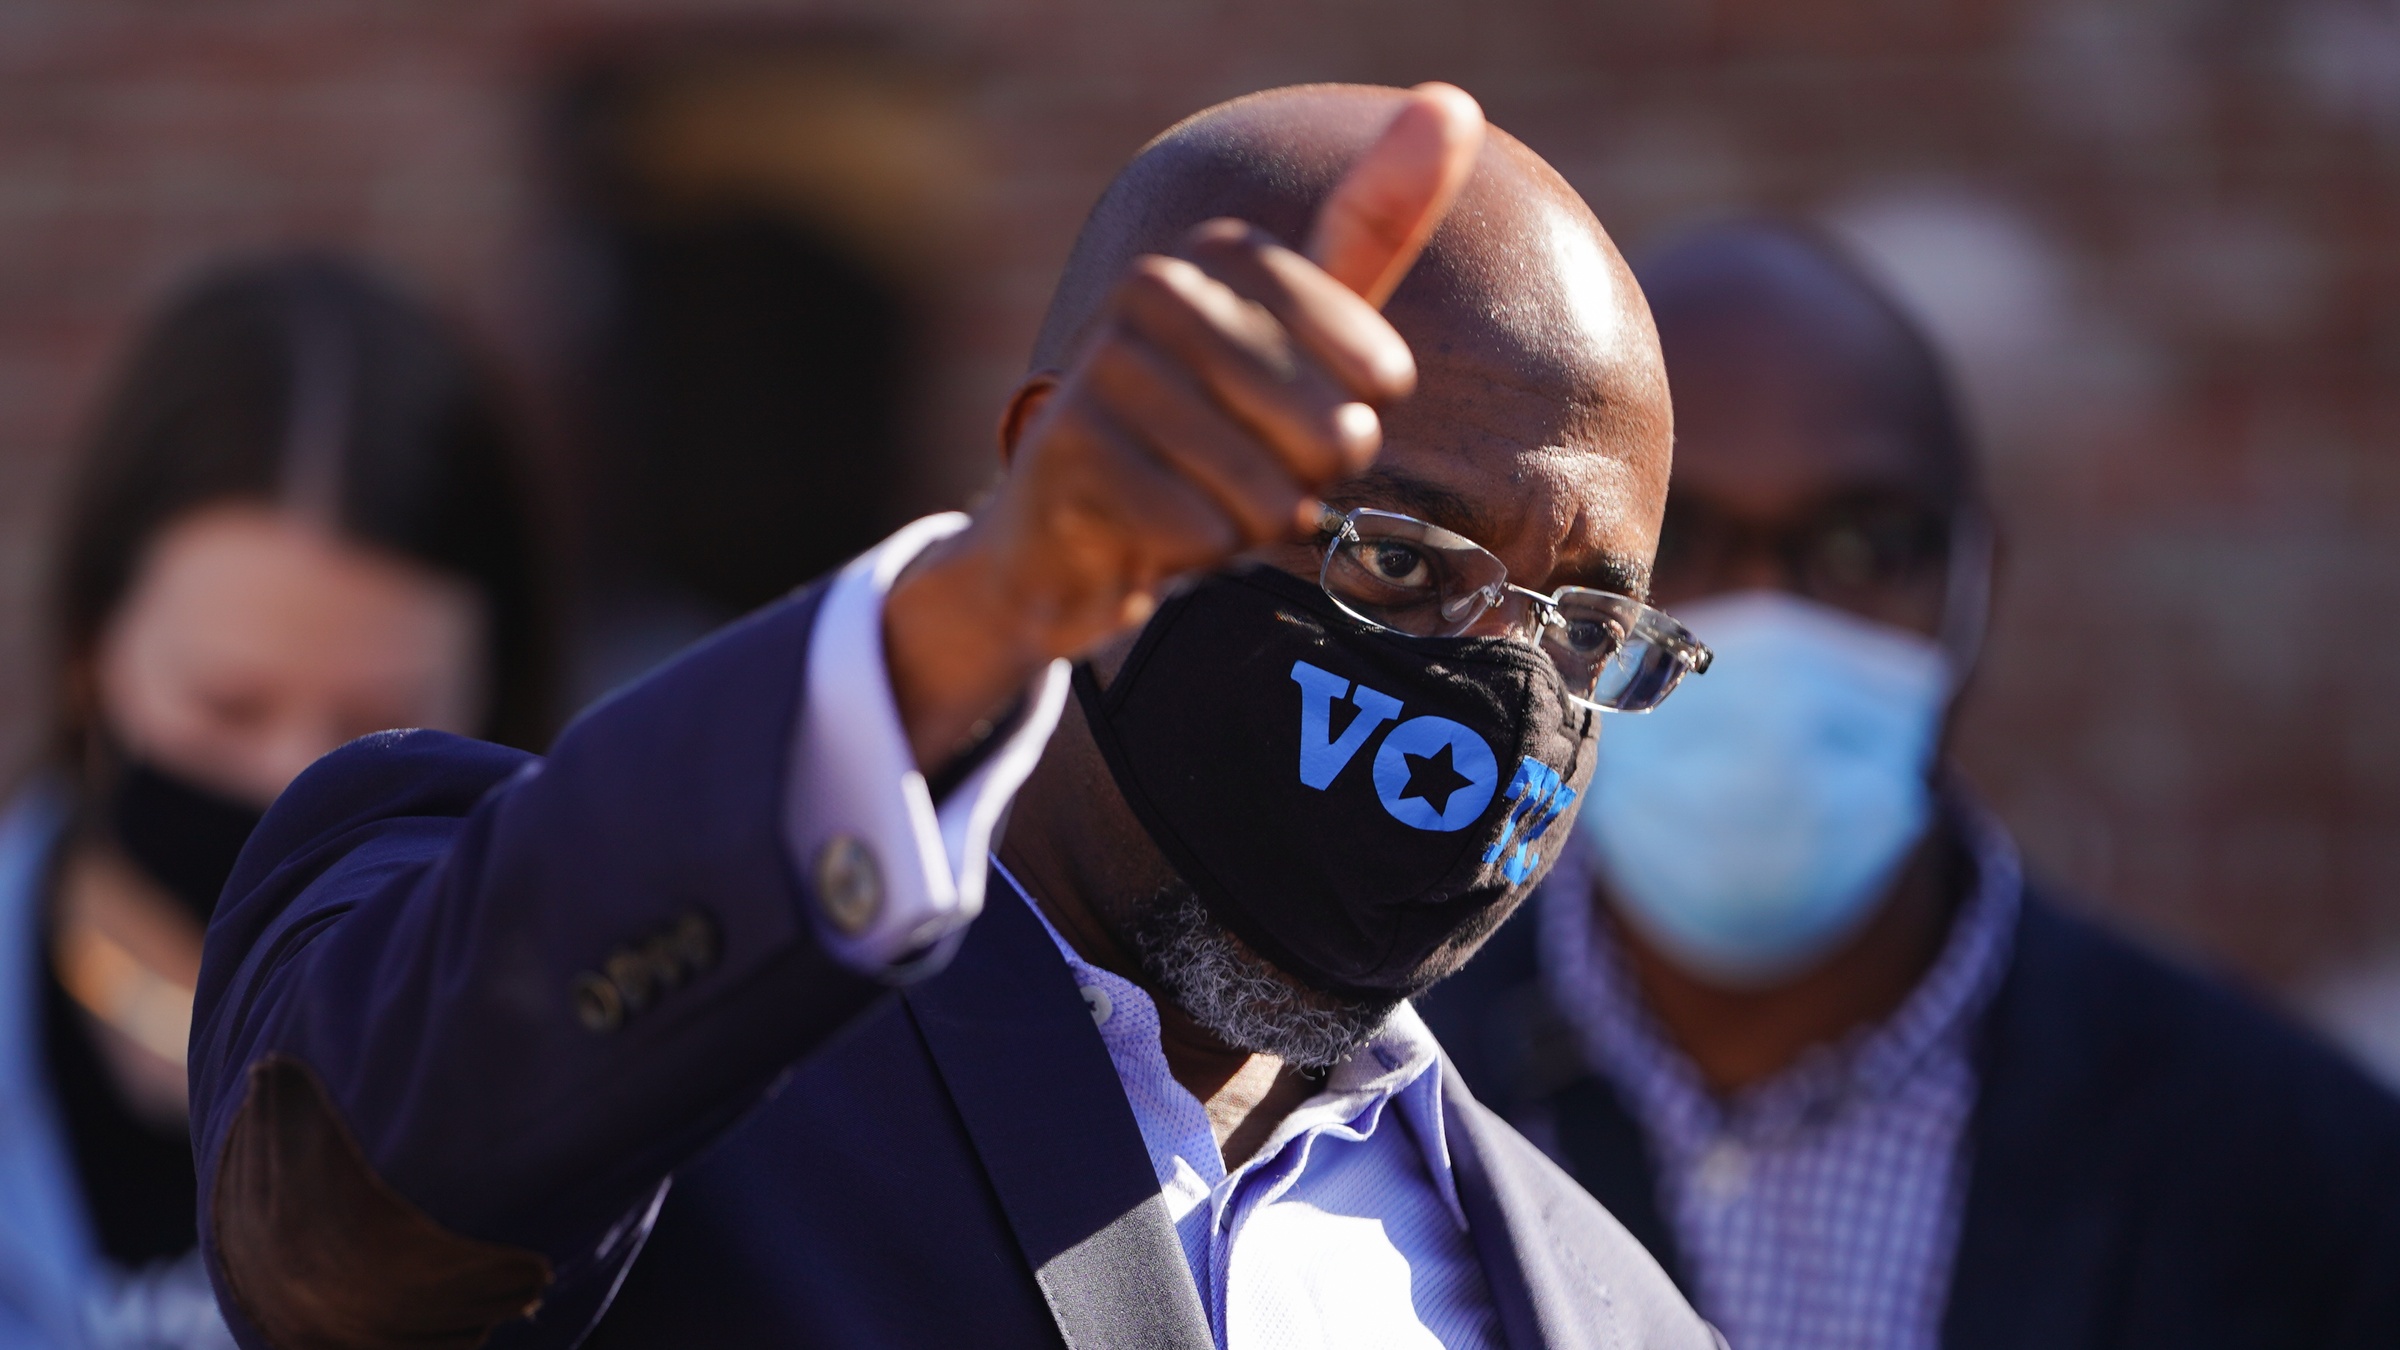 Democratic US Senate candidate Reverend Raphael Warnock gives a supporter a thumbs up at a campaign event